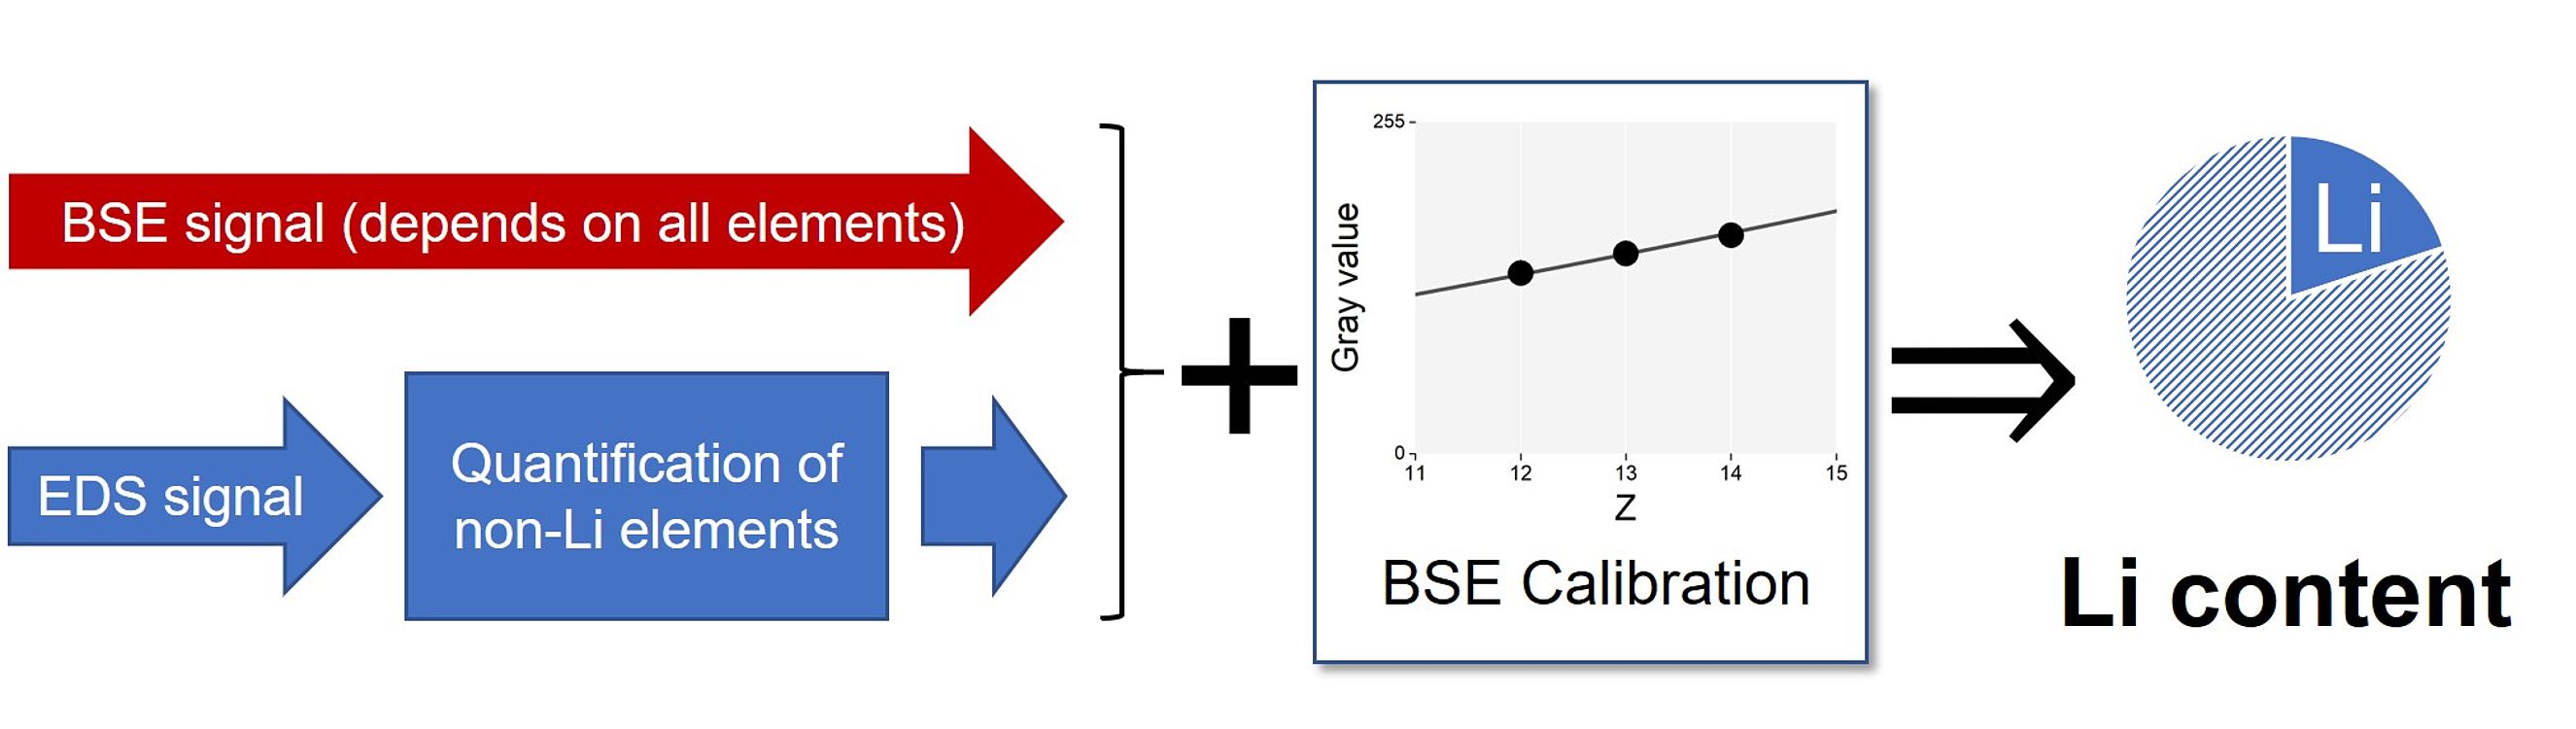 Graphic: Lithium can be inferred by combining the EDS and BSE methods.